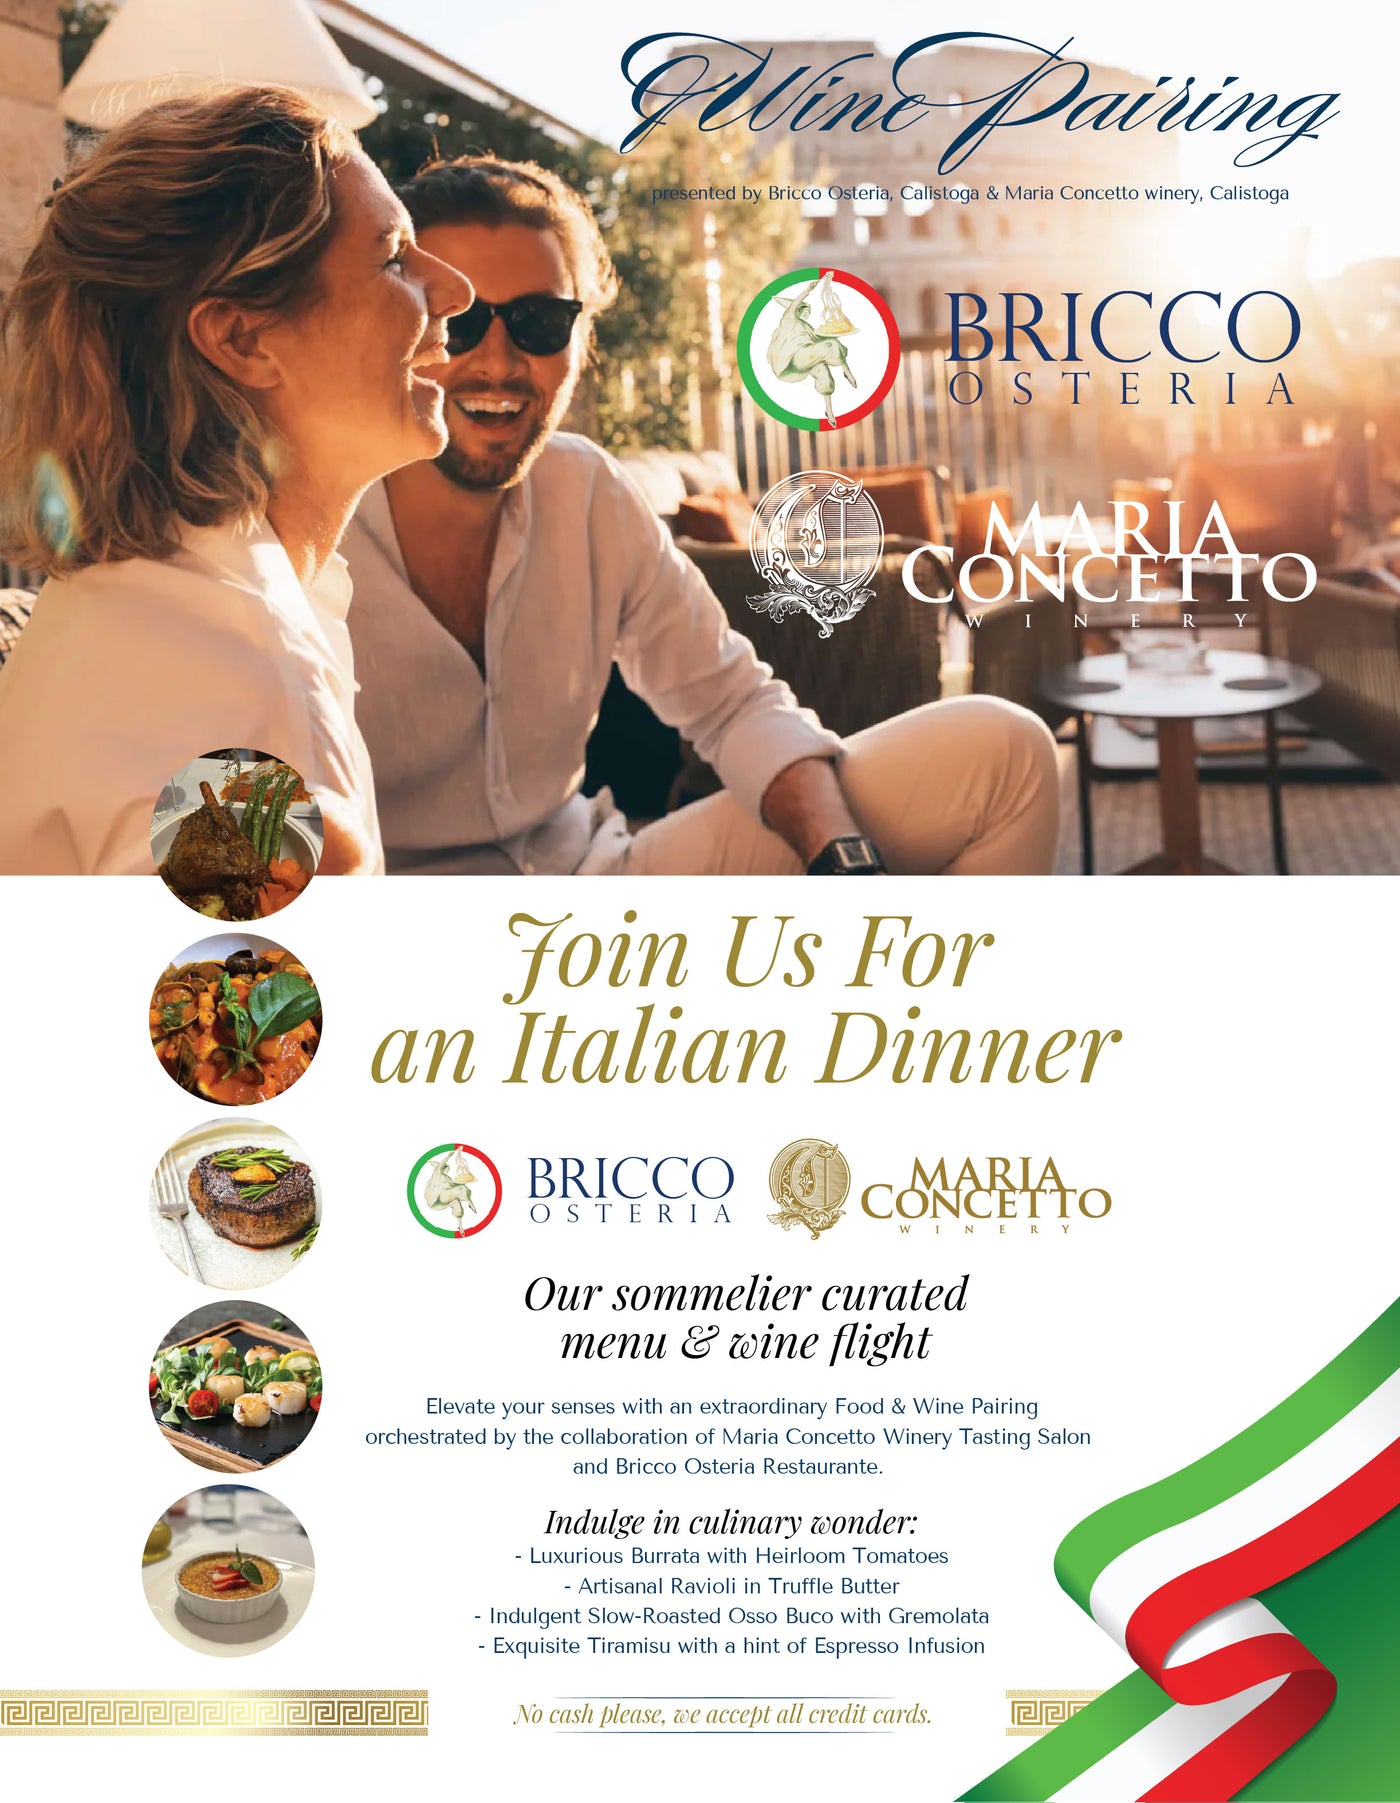 Maria Concetto Winery and Bricco Osteria Restaurante Food and Wine Pairing!